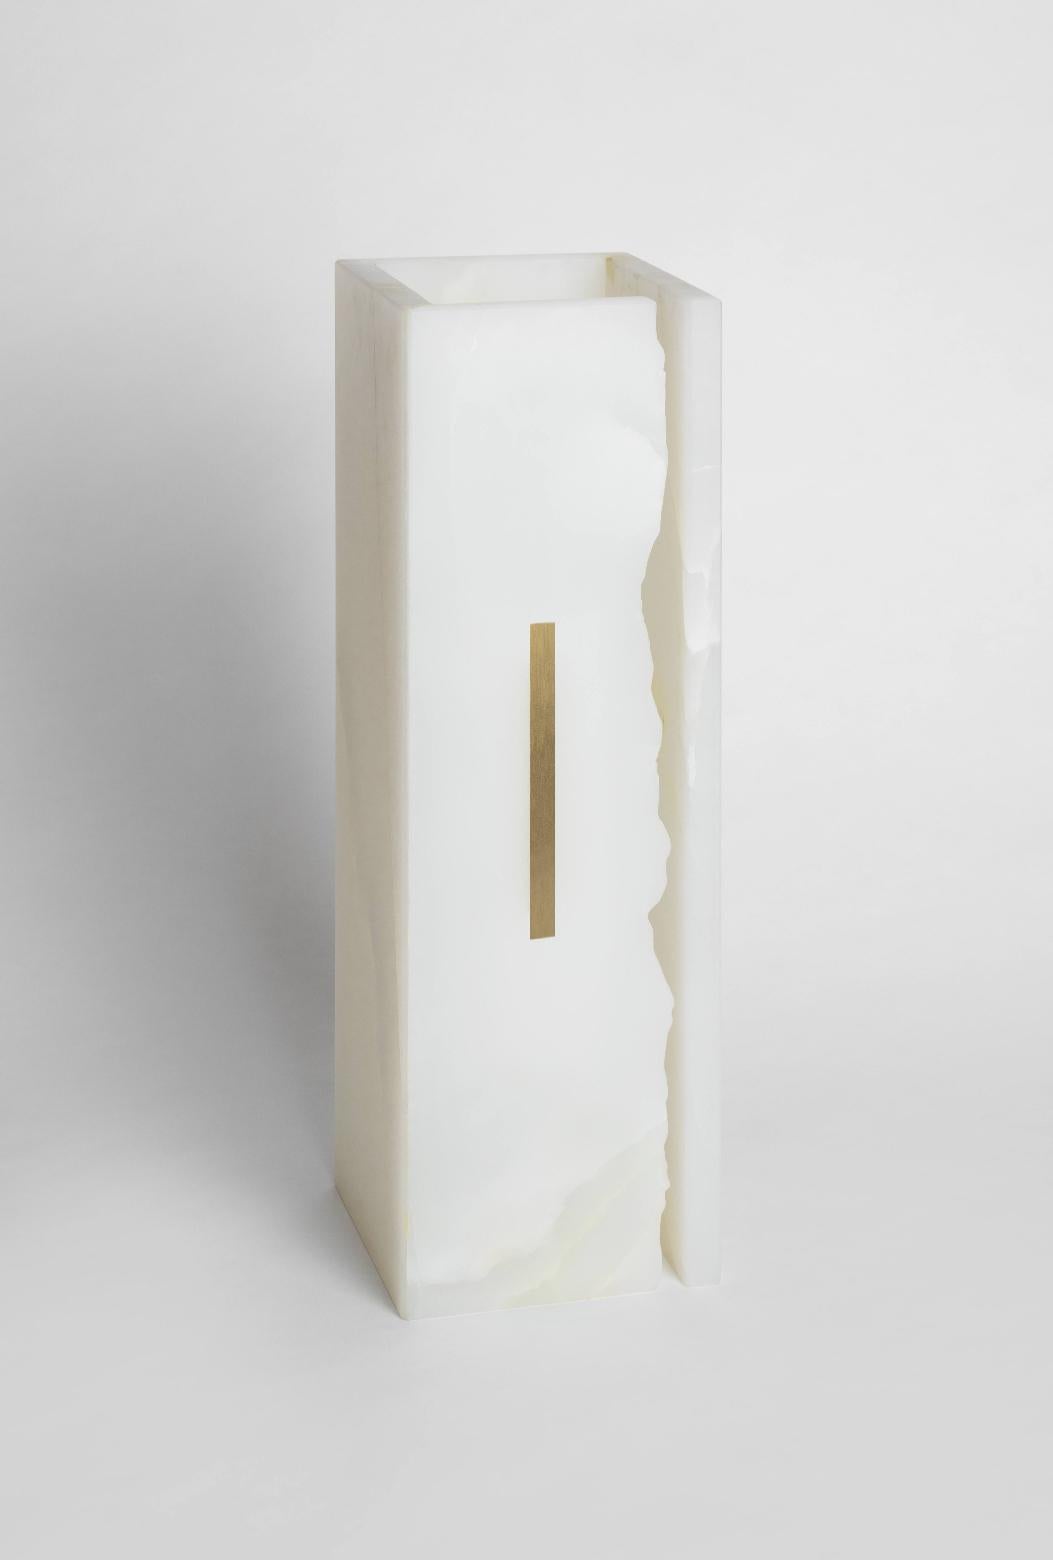 03C pure white Onix large sculpture by Marie Jeunet.
Dimensions: H 52 x L 16.5 cm.
Materials: Pure White Onix Marble

A tribute collection to the exceptional stones that nature offers us, such as onyx or marble. Precious, semi-translucent